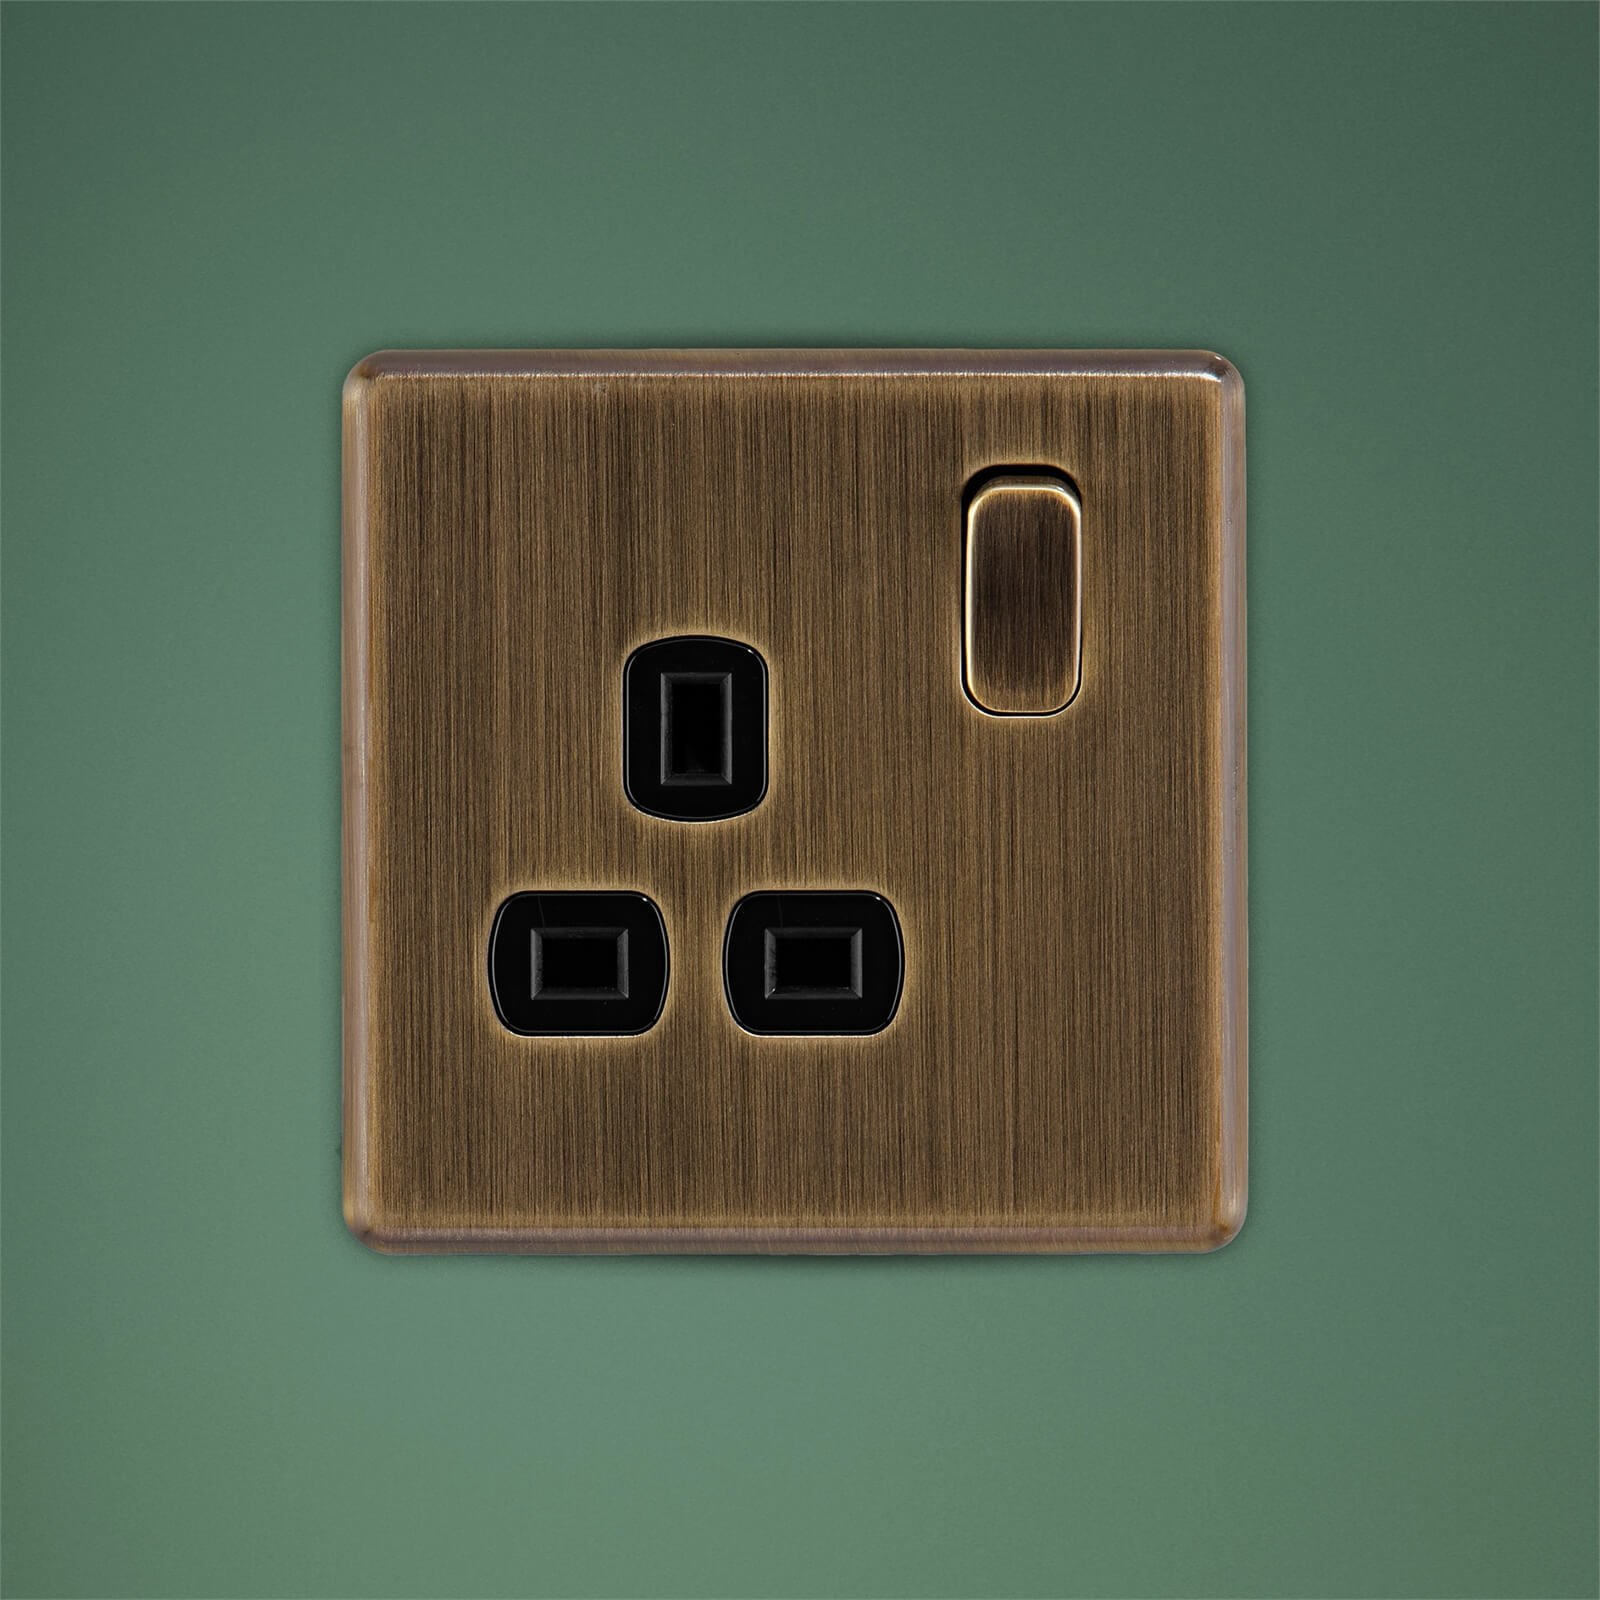 Arlec Fusion 13A 1 Gang Antique Brass Single switched socket